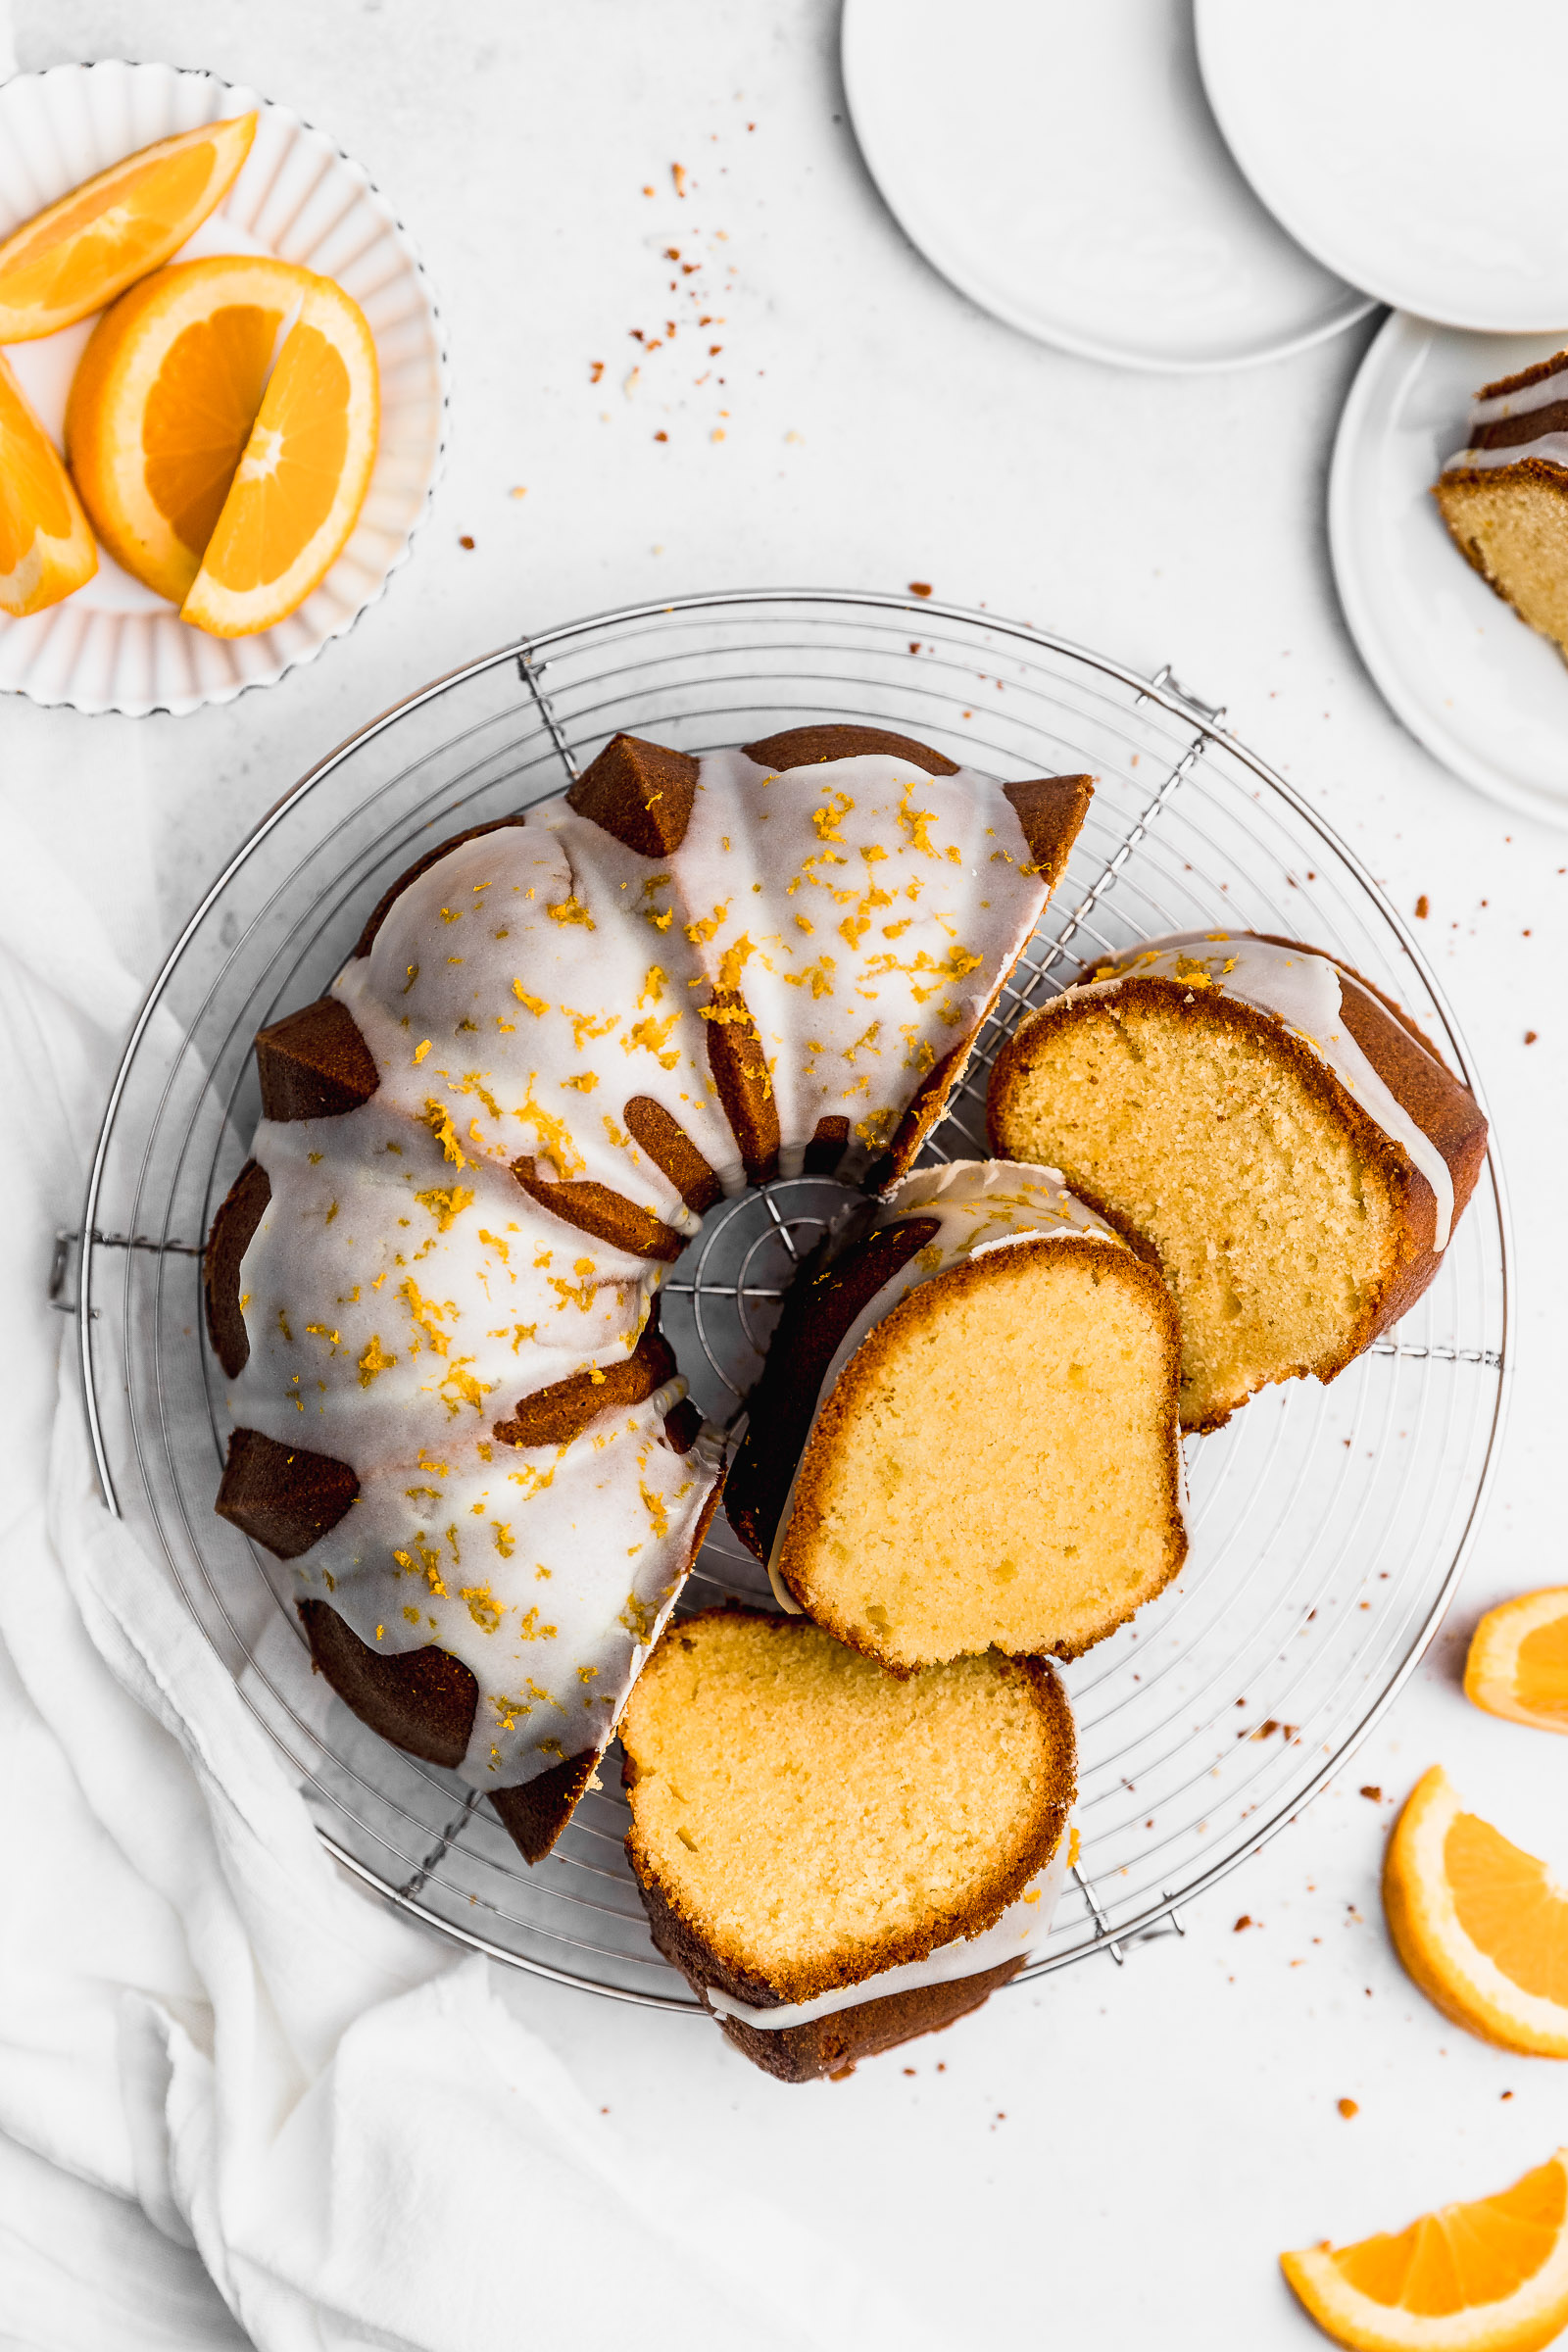 Top View of an Orange Bundt Cake, with a white glaze and orange zest on top. 3 slices lay on the side showing the crumb inside and that light orange colour.